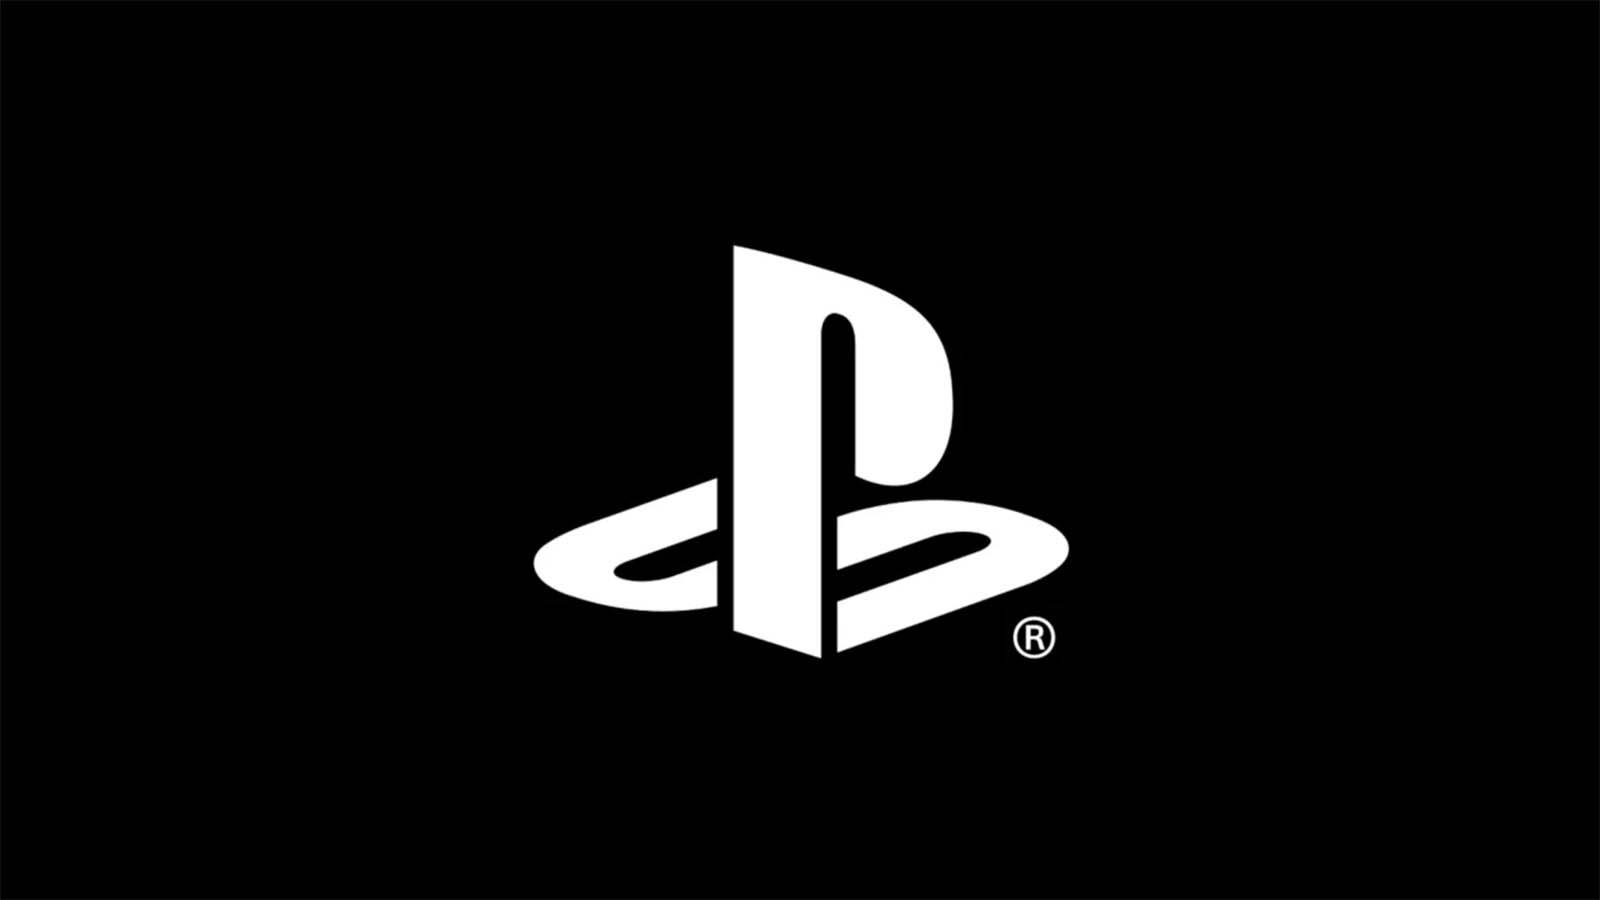 The Sony PlayStation logo on a black background